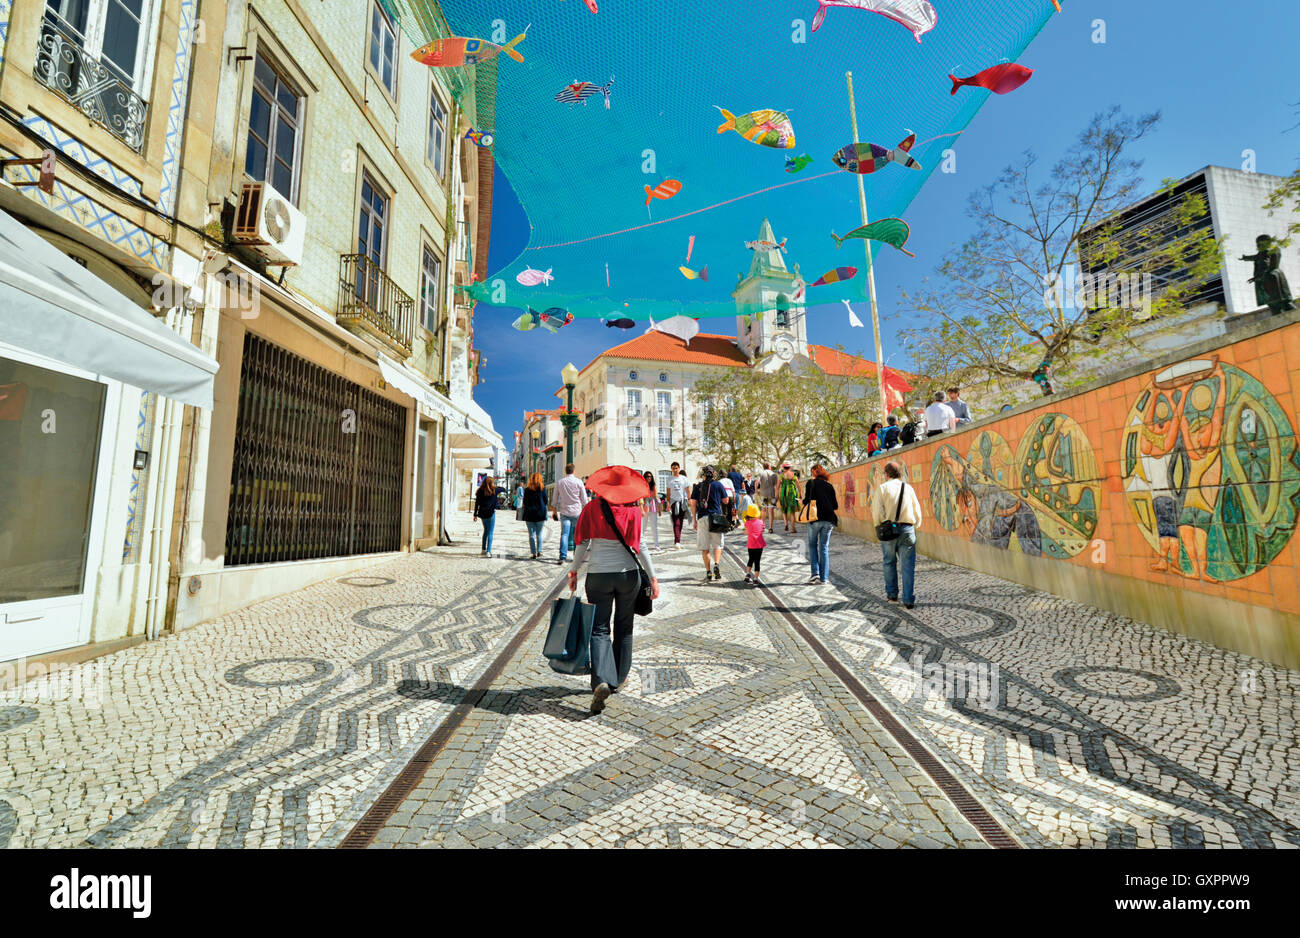 Portugal: Woman with shopping bags and red summer hat walking along decorated cobble stone street with with fish art in the sky Stock Photo